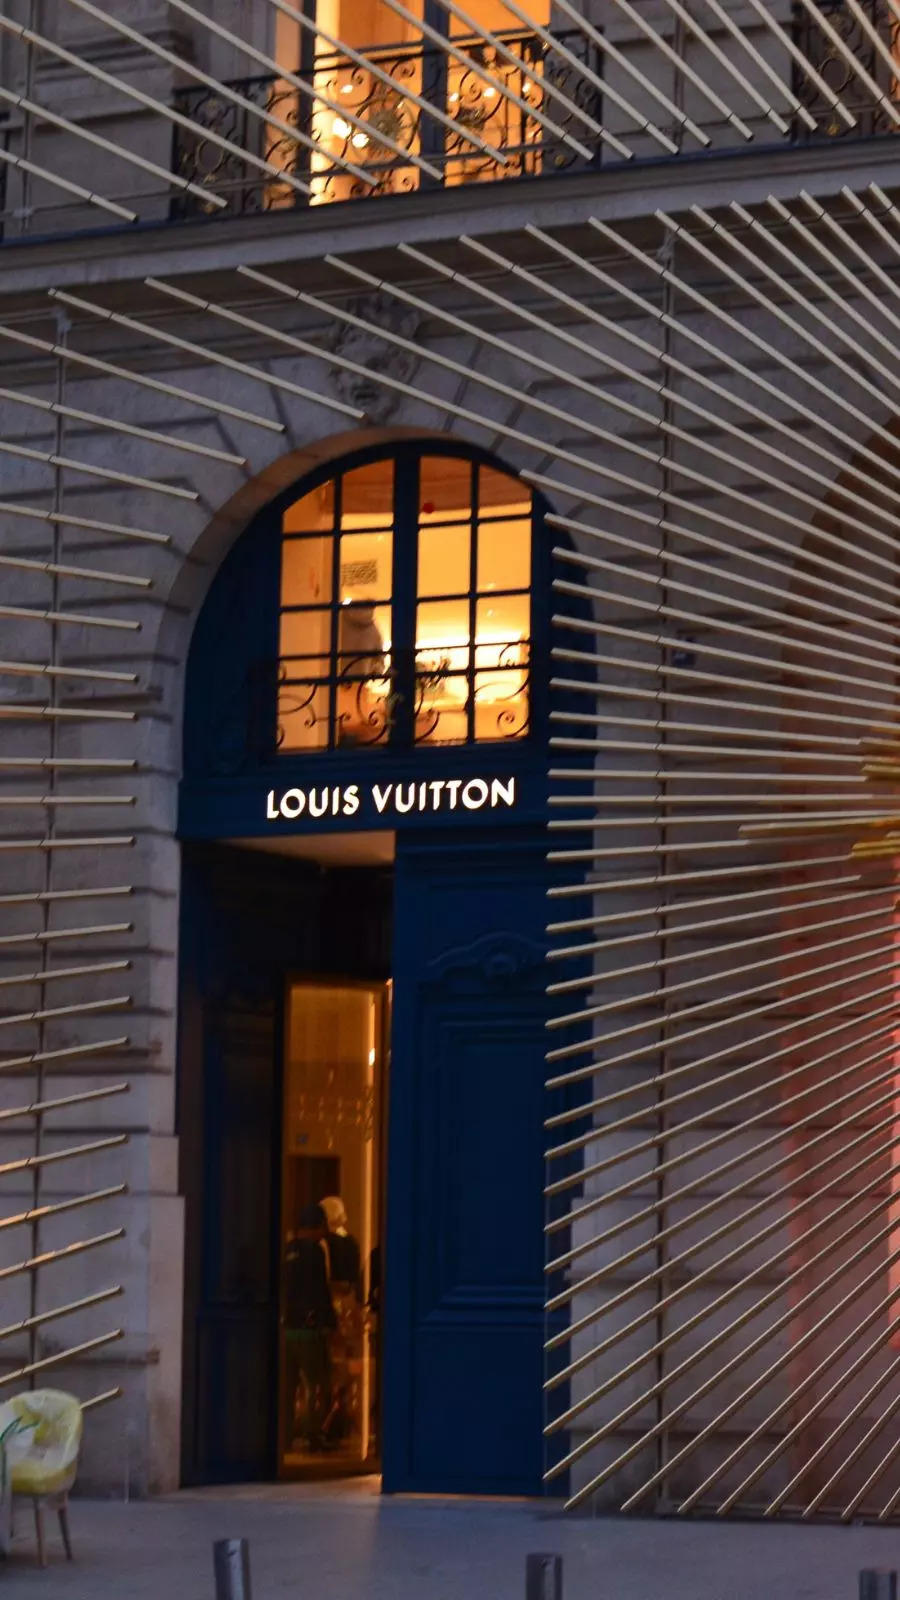 LVMH becomes first European firm to cross market cap of $500